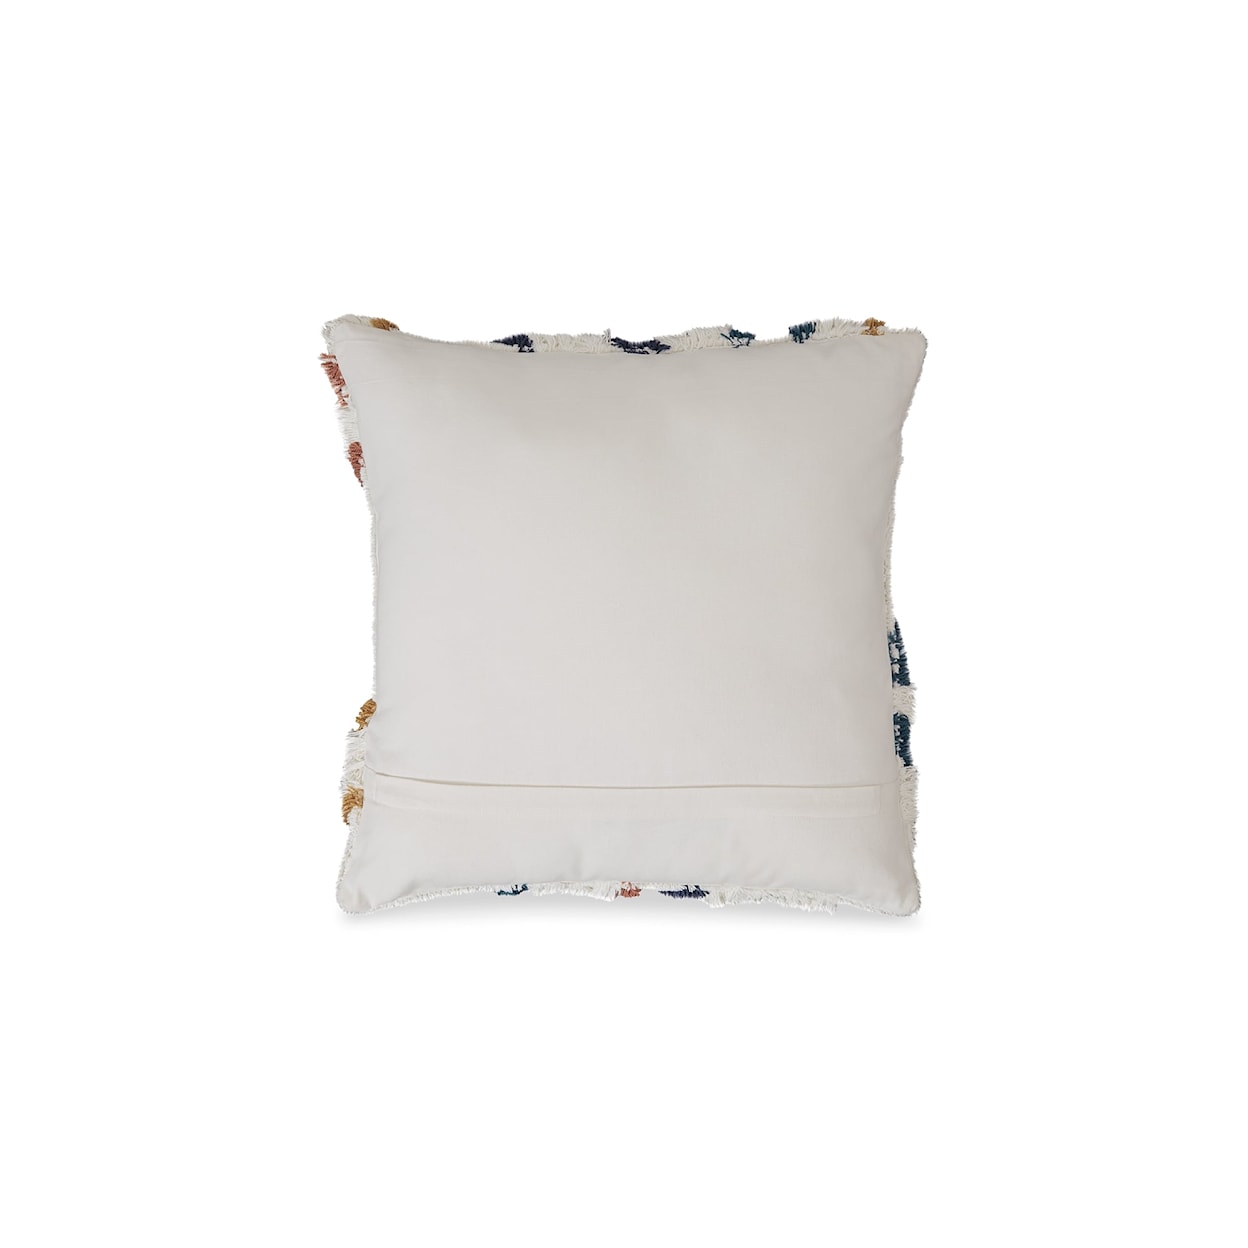 Benchcraft Evermore Pillow (Set of 4)